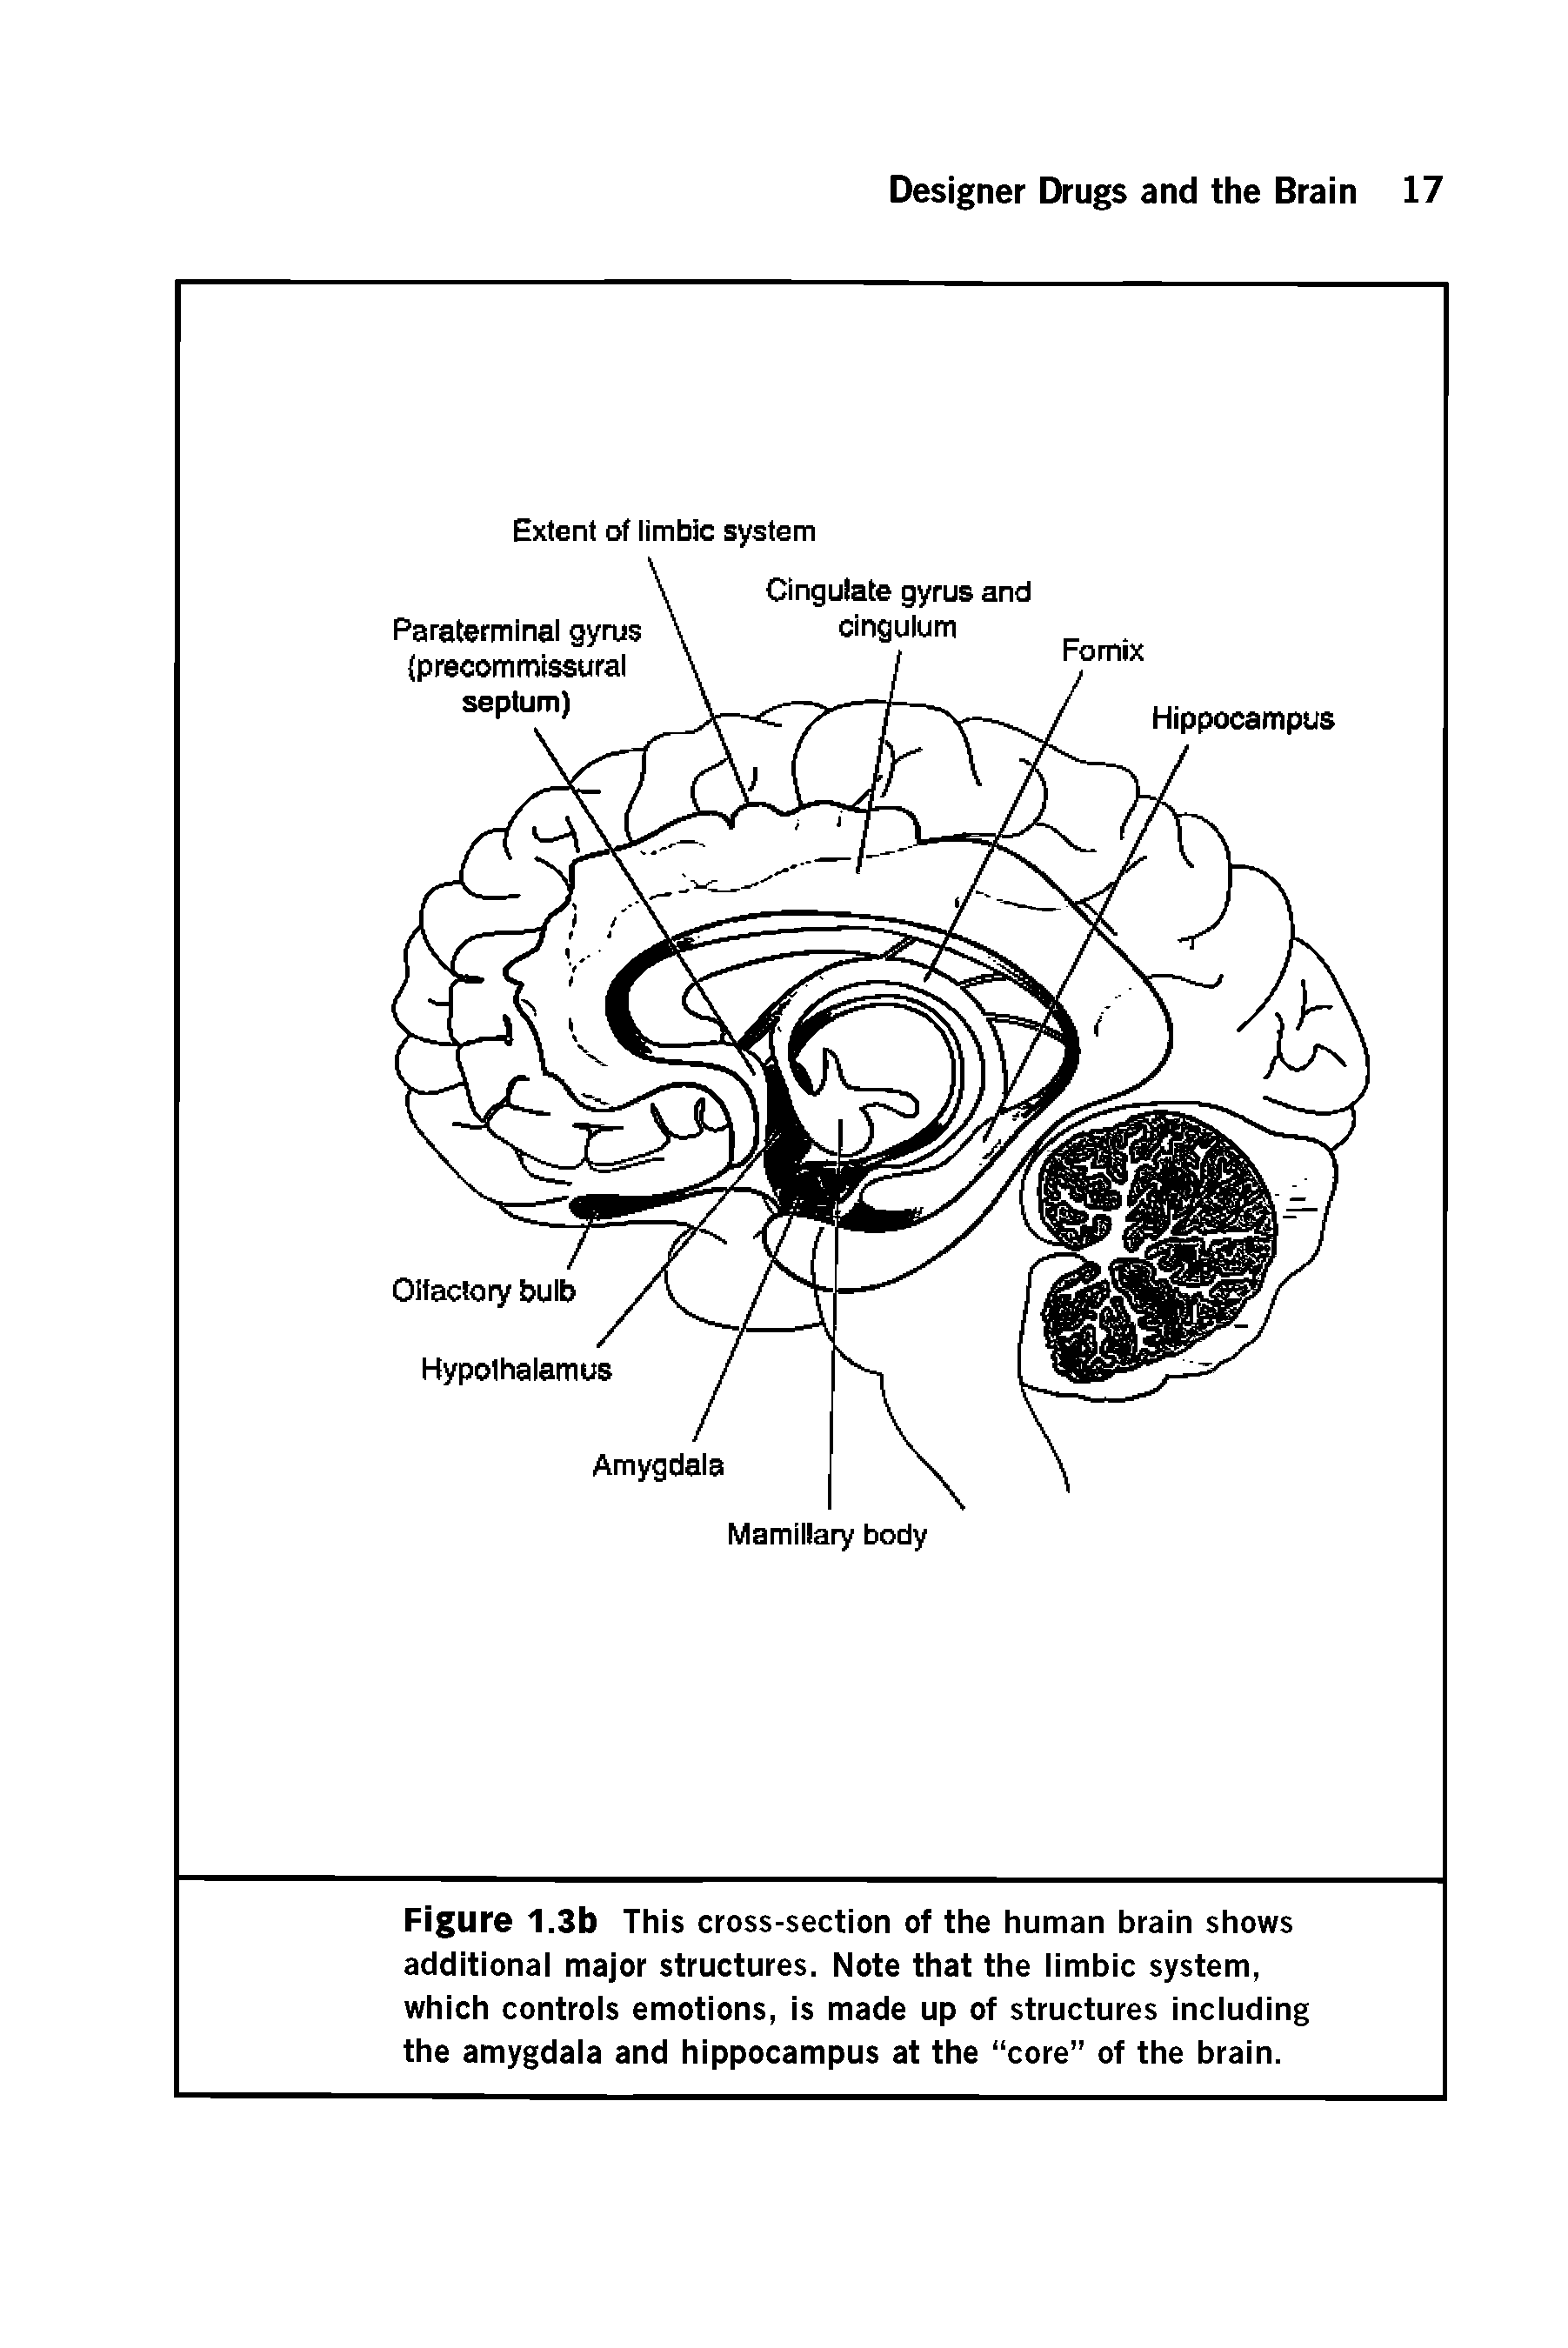 Figure 1.3b This cross-section of the human brain shows additional major structures. Note that the limbic system, which controls emotions, is made up of structures including the amygdala and hippocampus at the core of the brain.